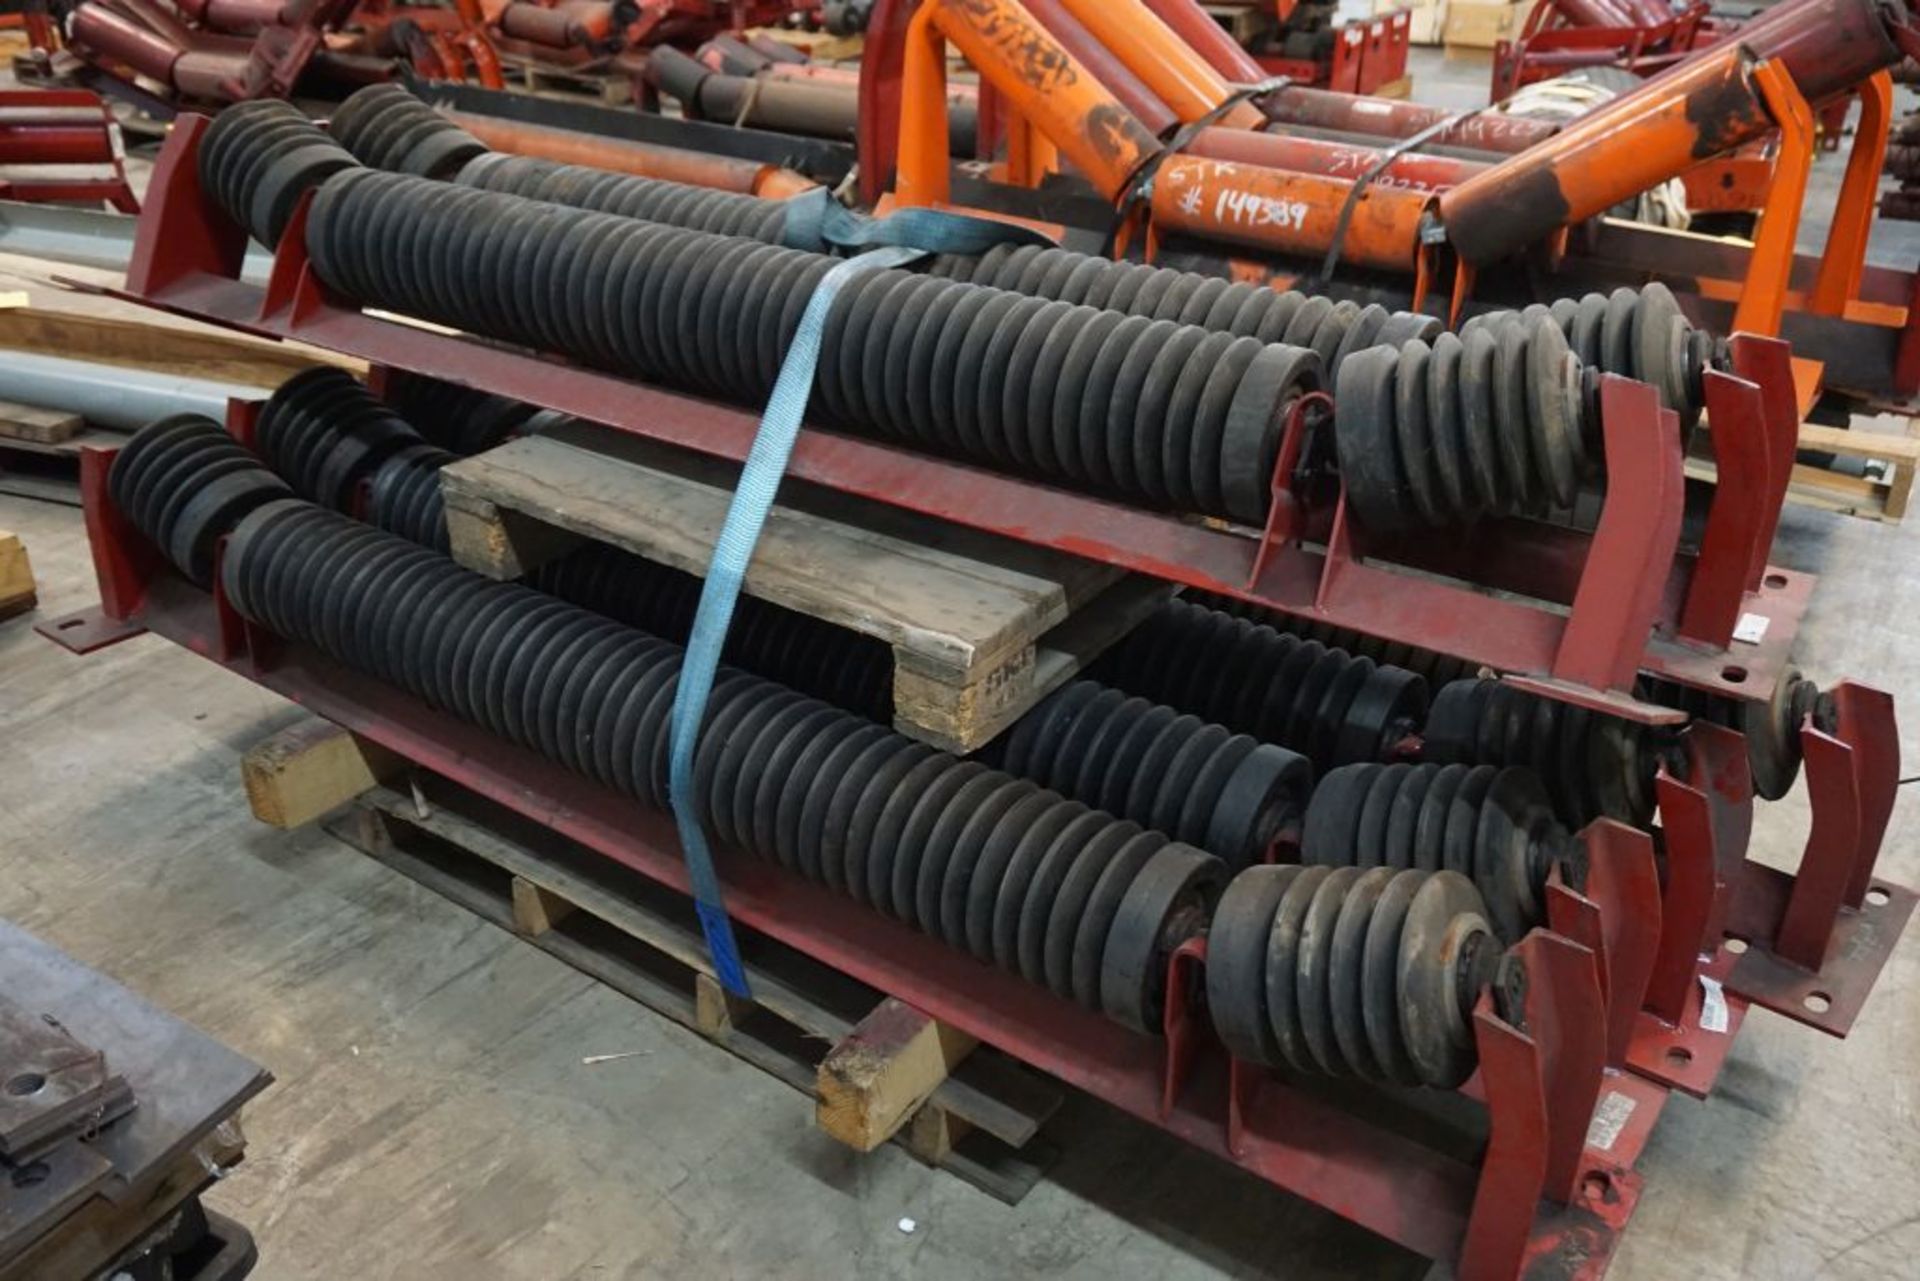 Lot of (6) 6"Diameter Training Idlers|75" Working Width; 90" Overall Width|Lot Loading Fee: $5.00 - Image 6 of 6